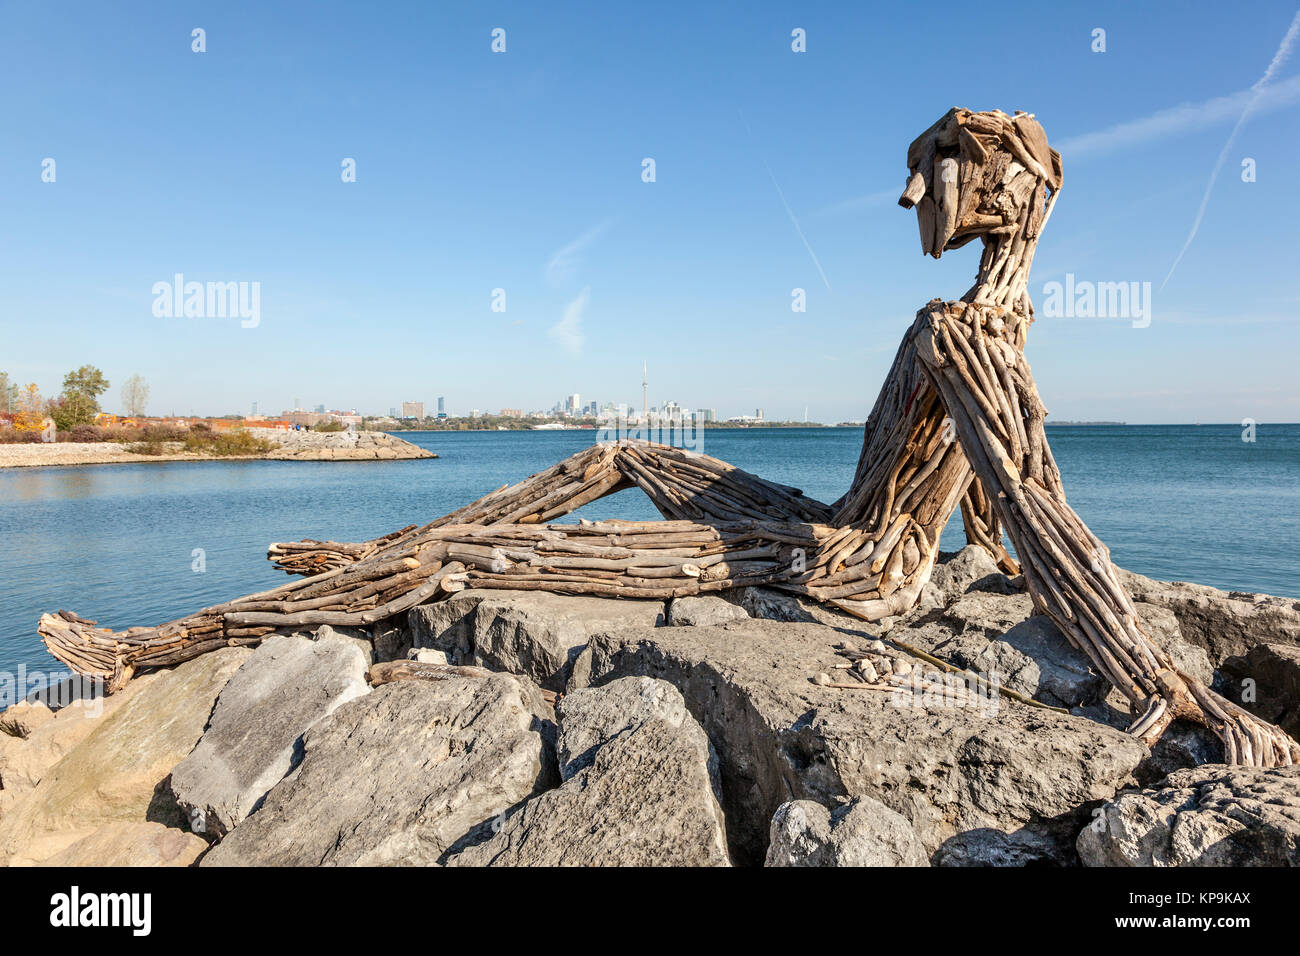 Toronto, Canada - Oct 19, 2017: Large driftwood sculpture by Julie Ryan and Thelia Sanders-Sheltonat at the Humber Bay Shores Park inToronto, Canada Stock Photo